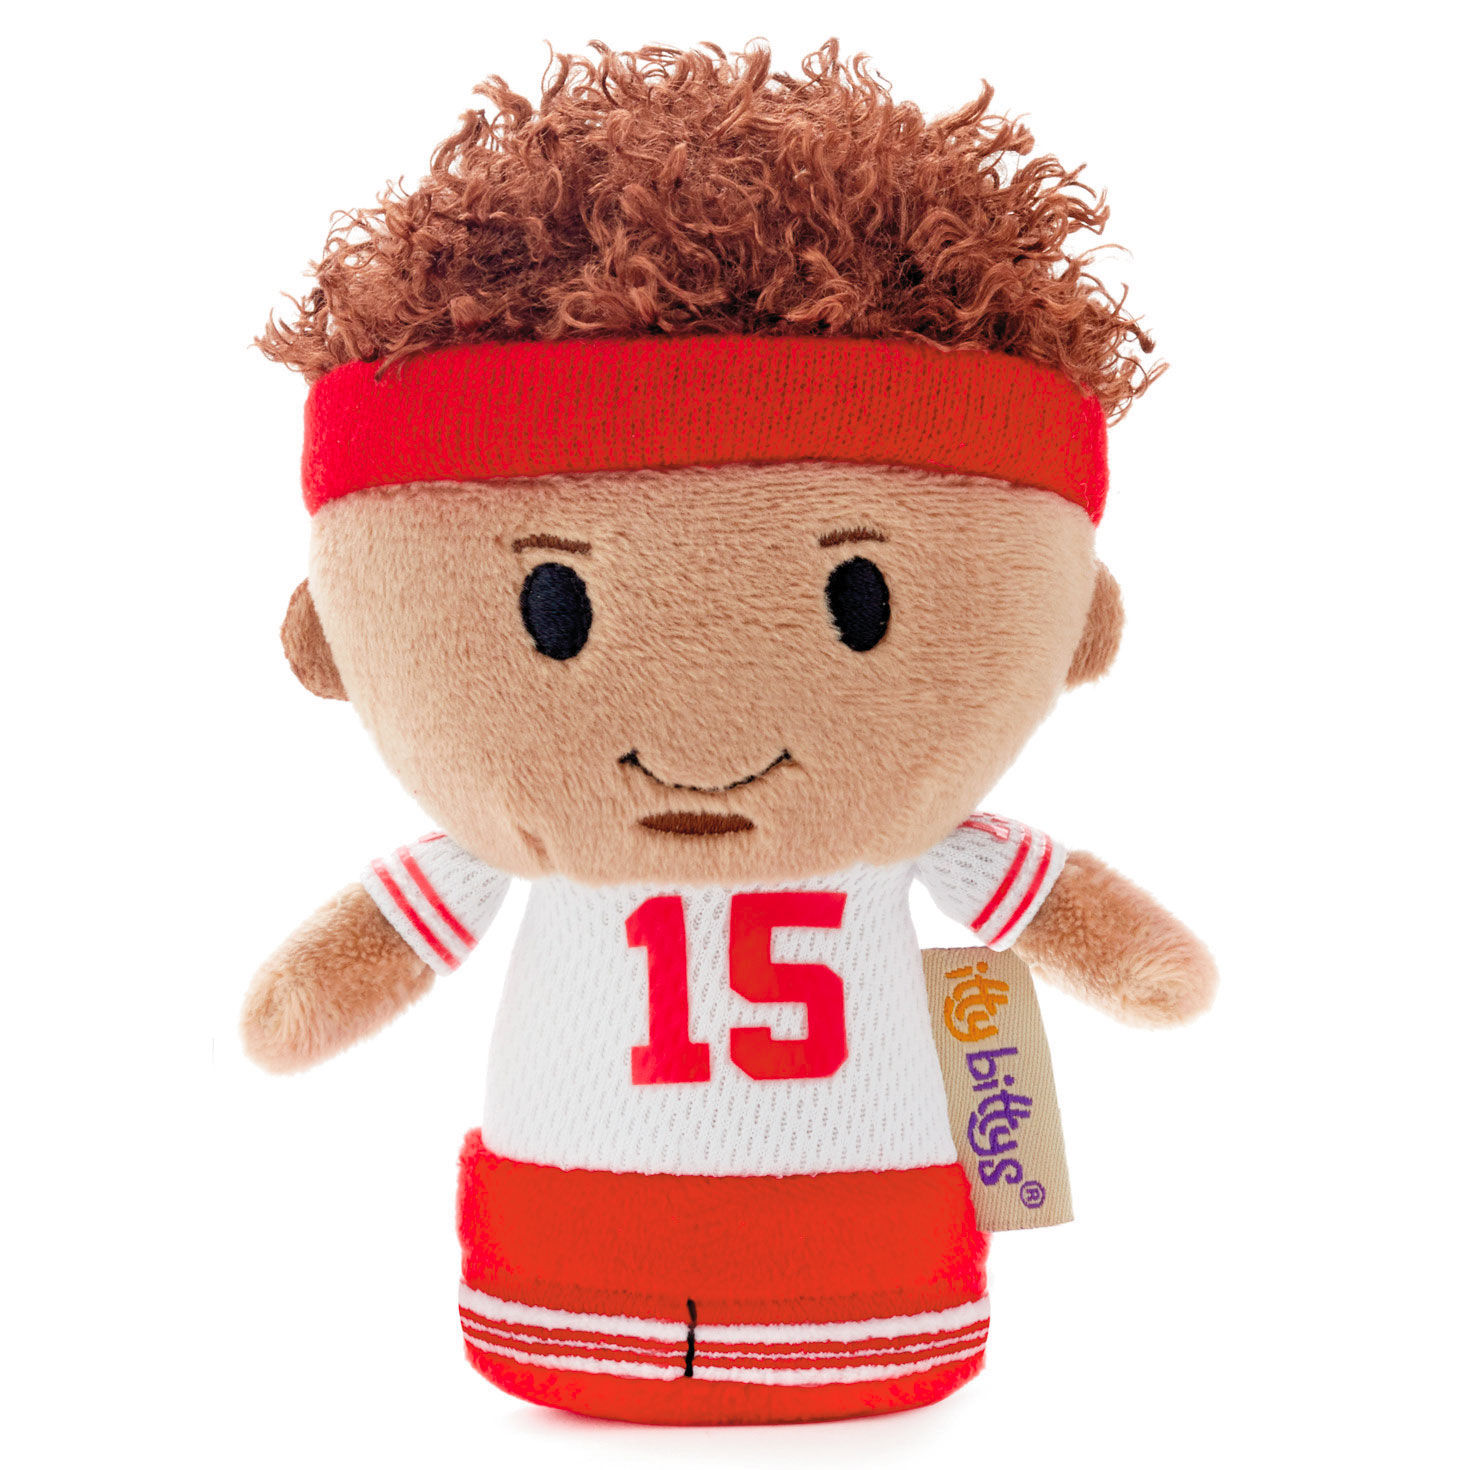 itty bittys® Football Player Patrick Mahomes II Plush Special Edition